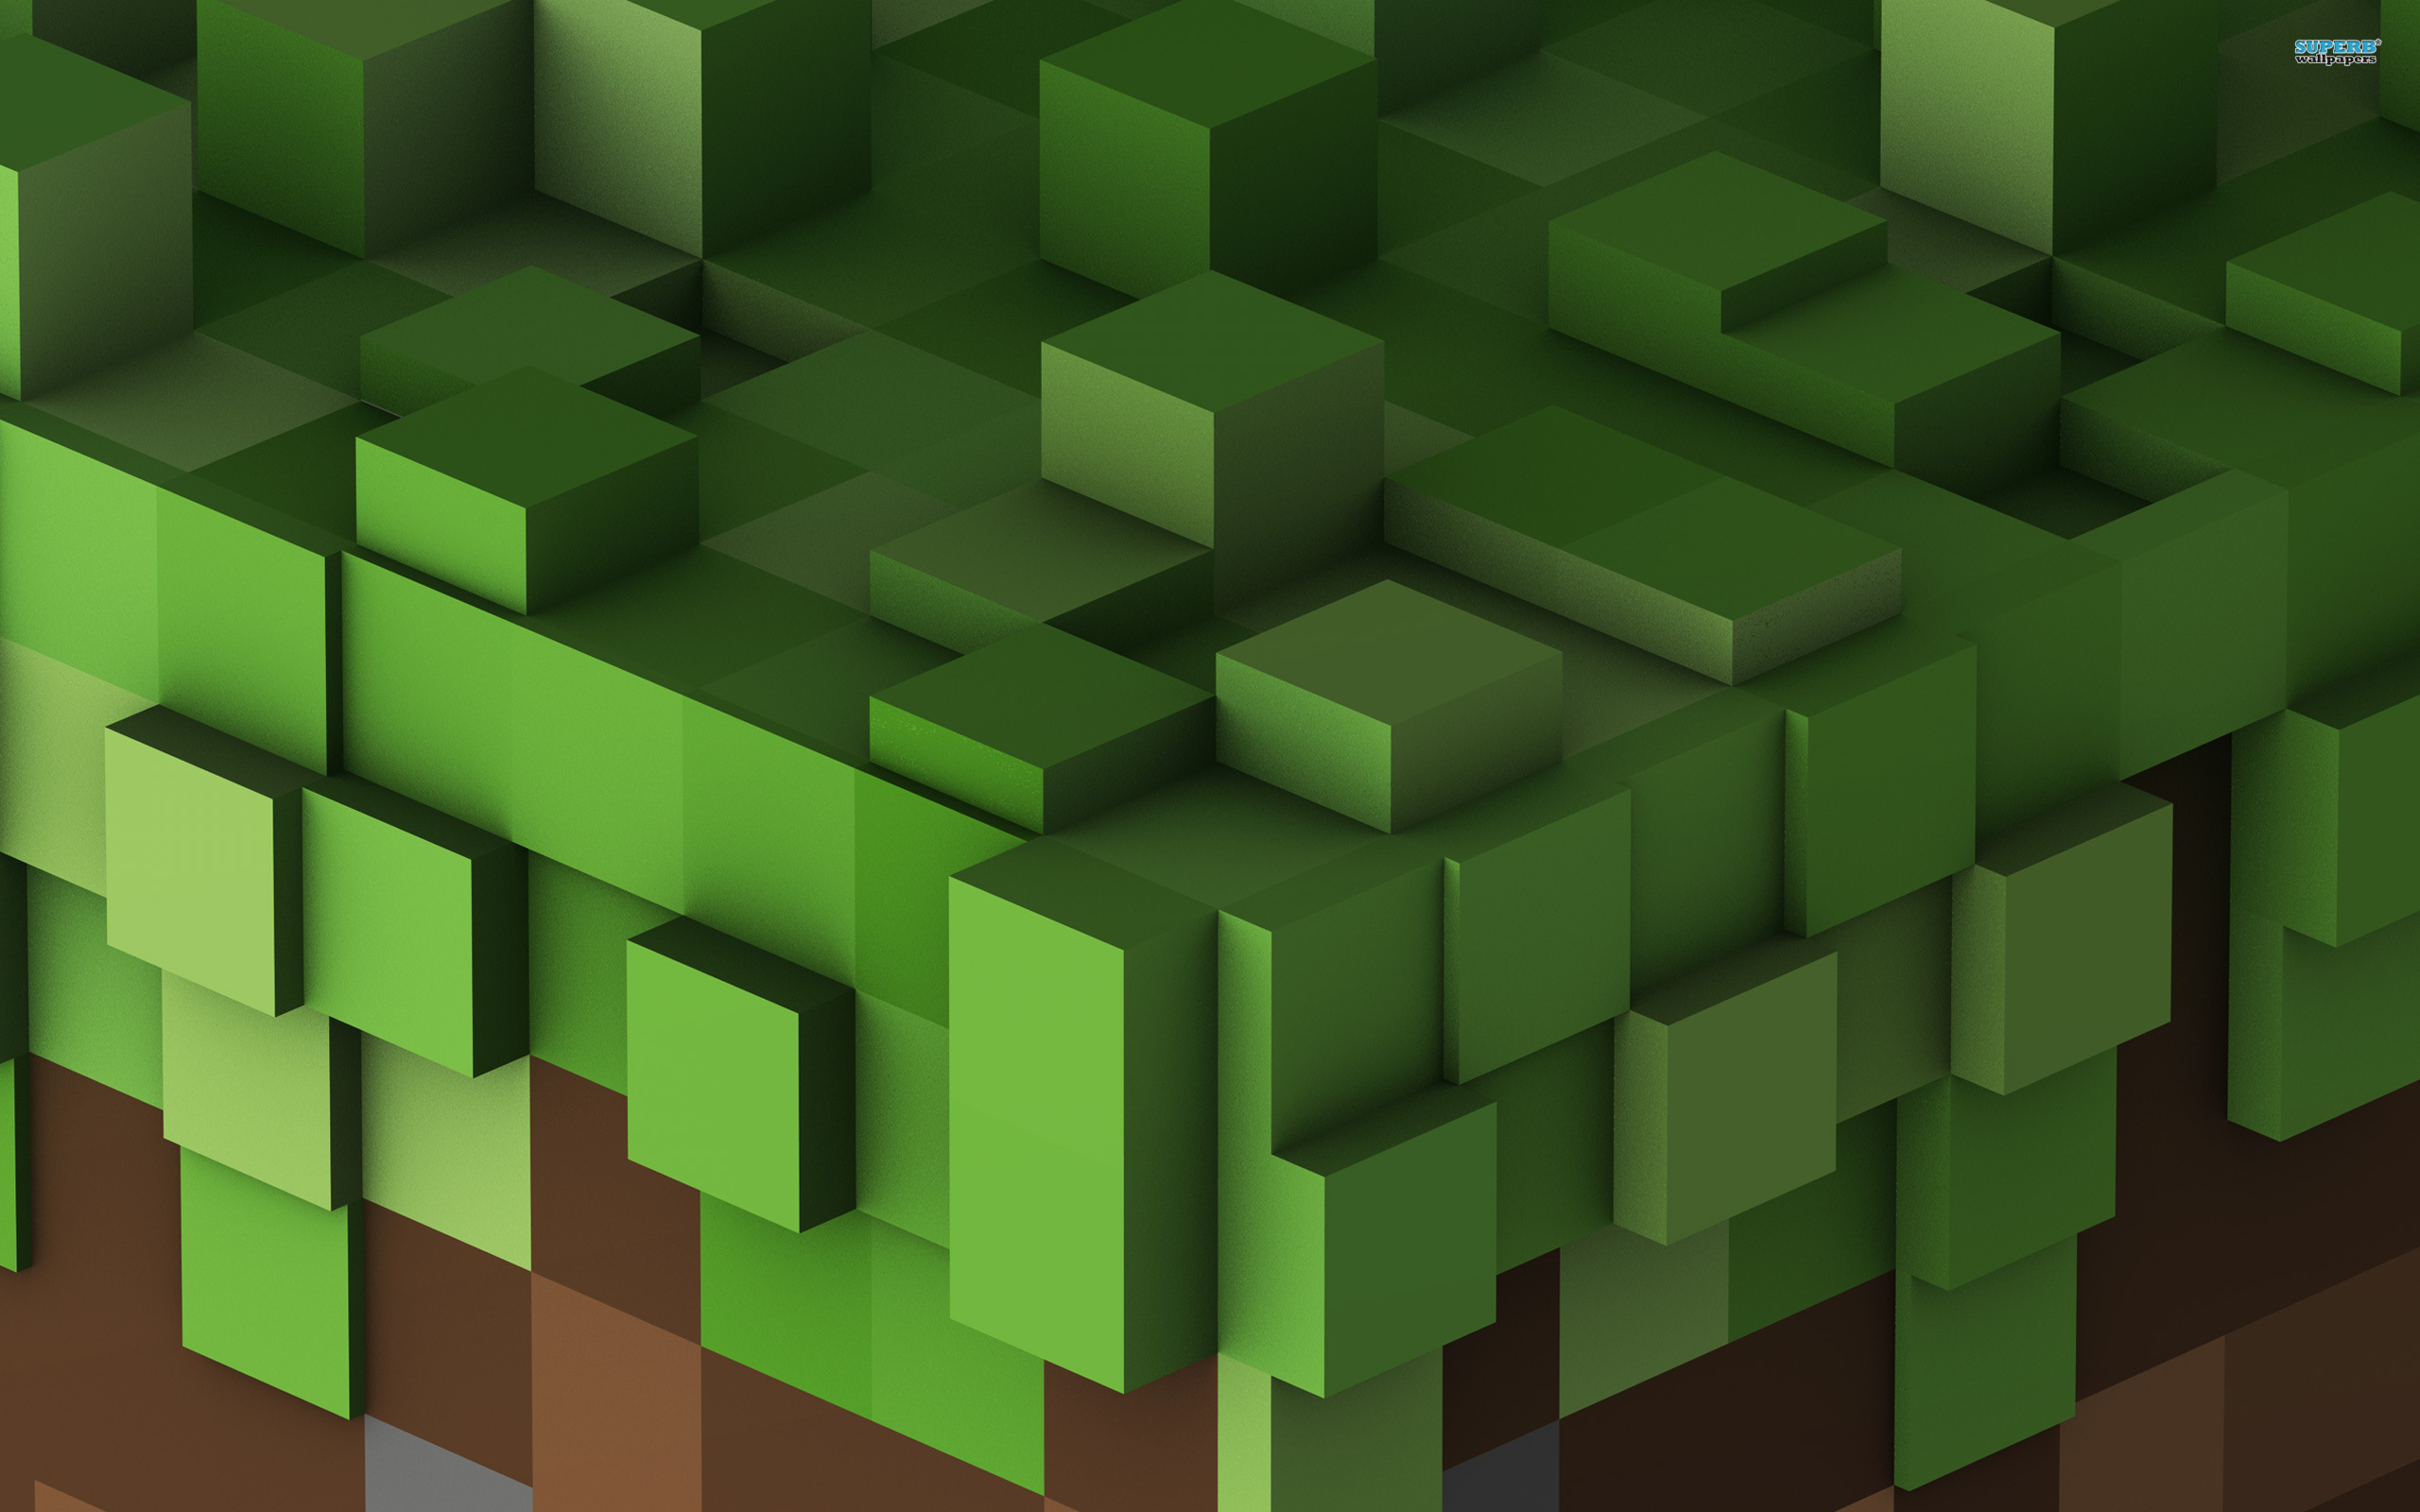 Free download we are giving away 4 HD Minecraft Wallpapers for